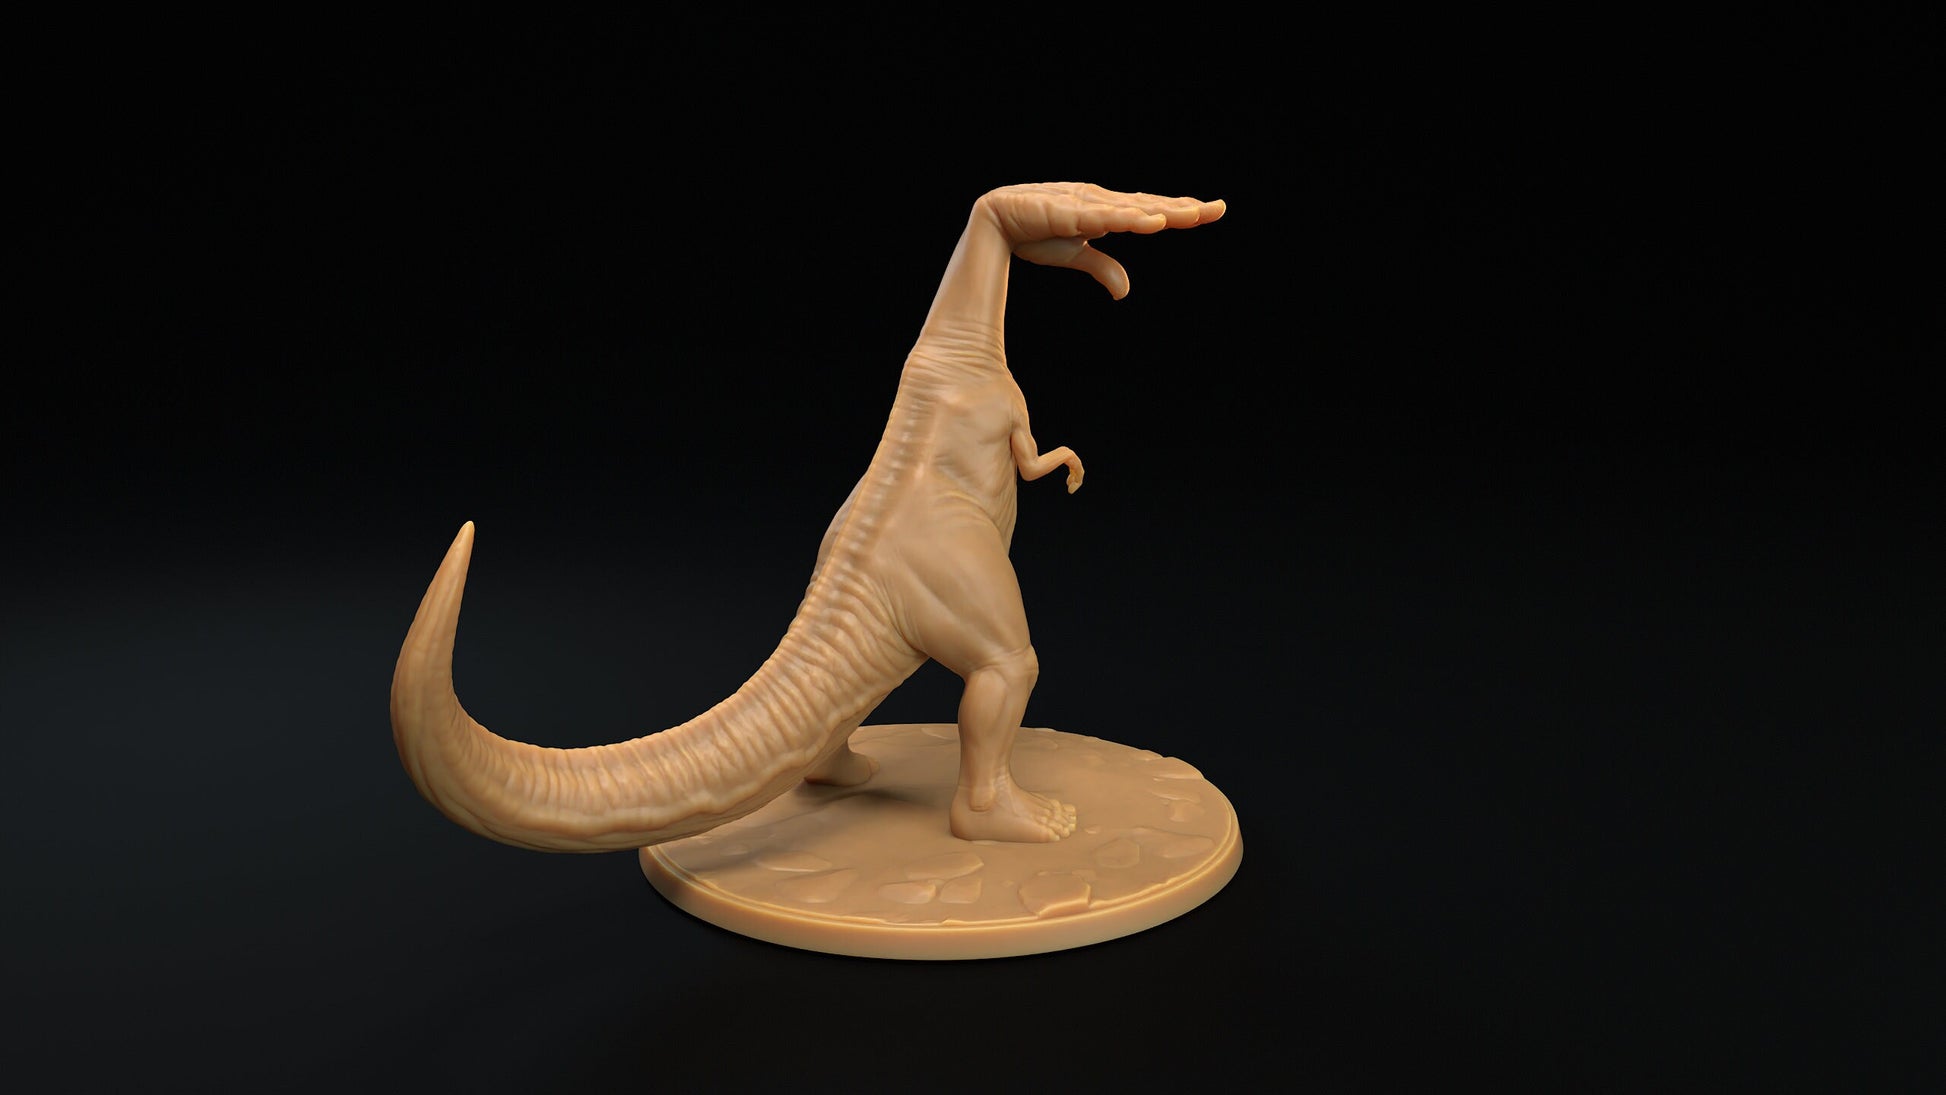 Handasaurus Rex | RPG Miniature for Dungeons and Dragons|Pathfinder|Tabletop Wargaming | Monster Miniature | Dragon Trappers Lodge